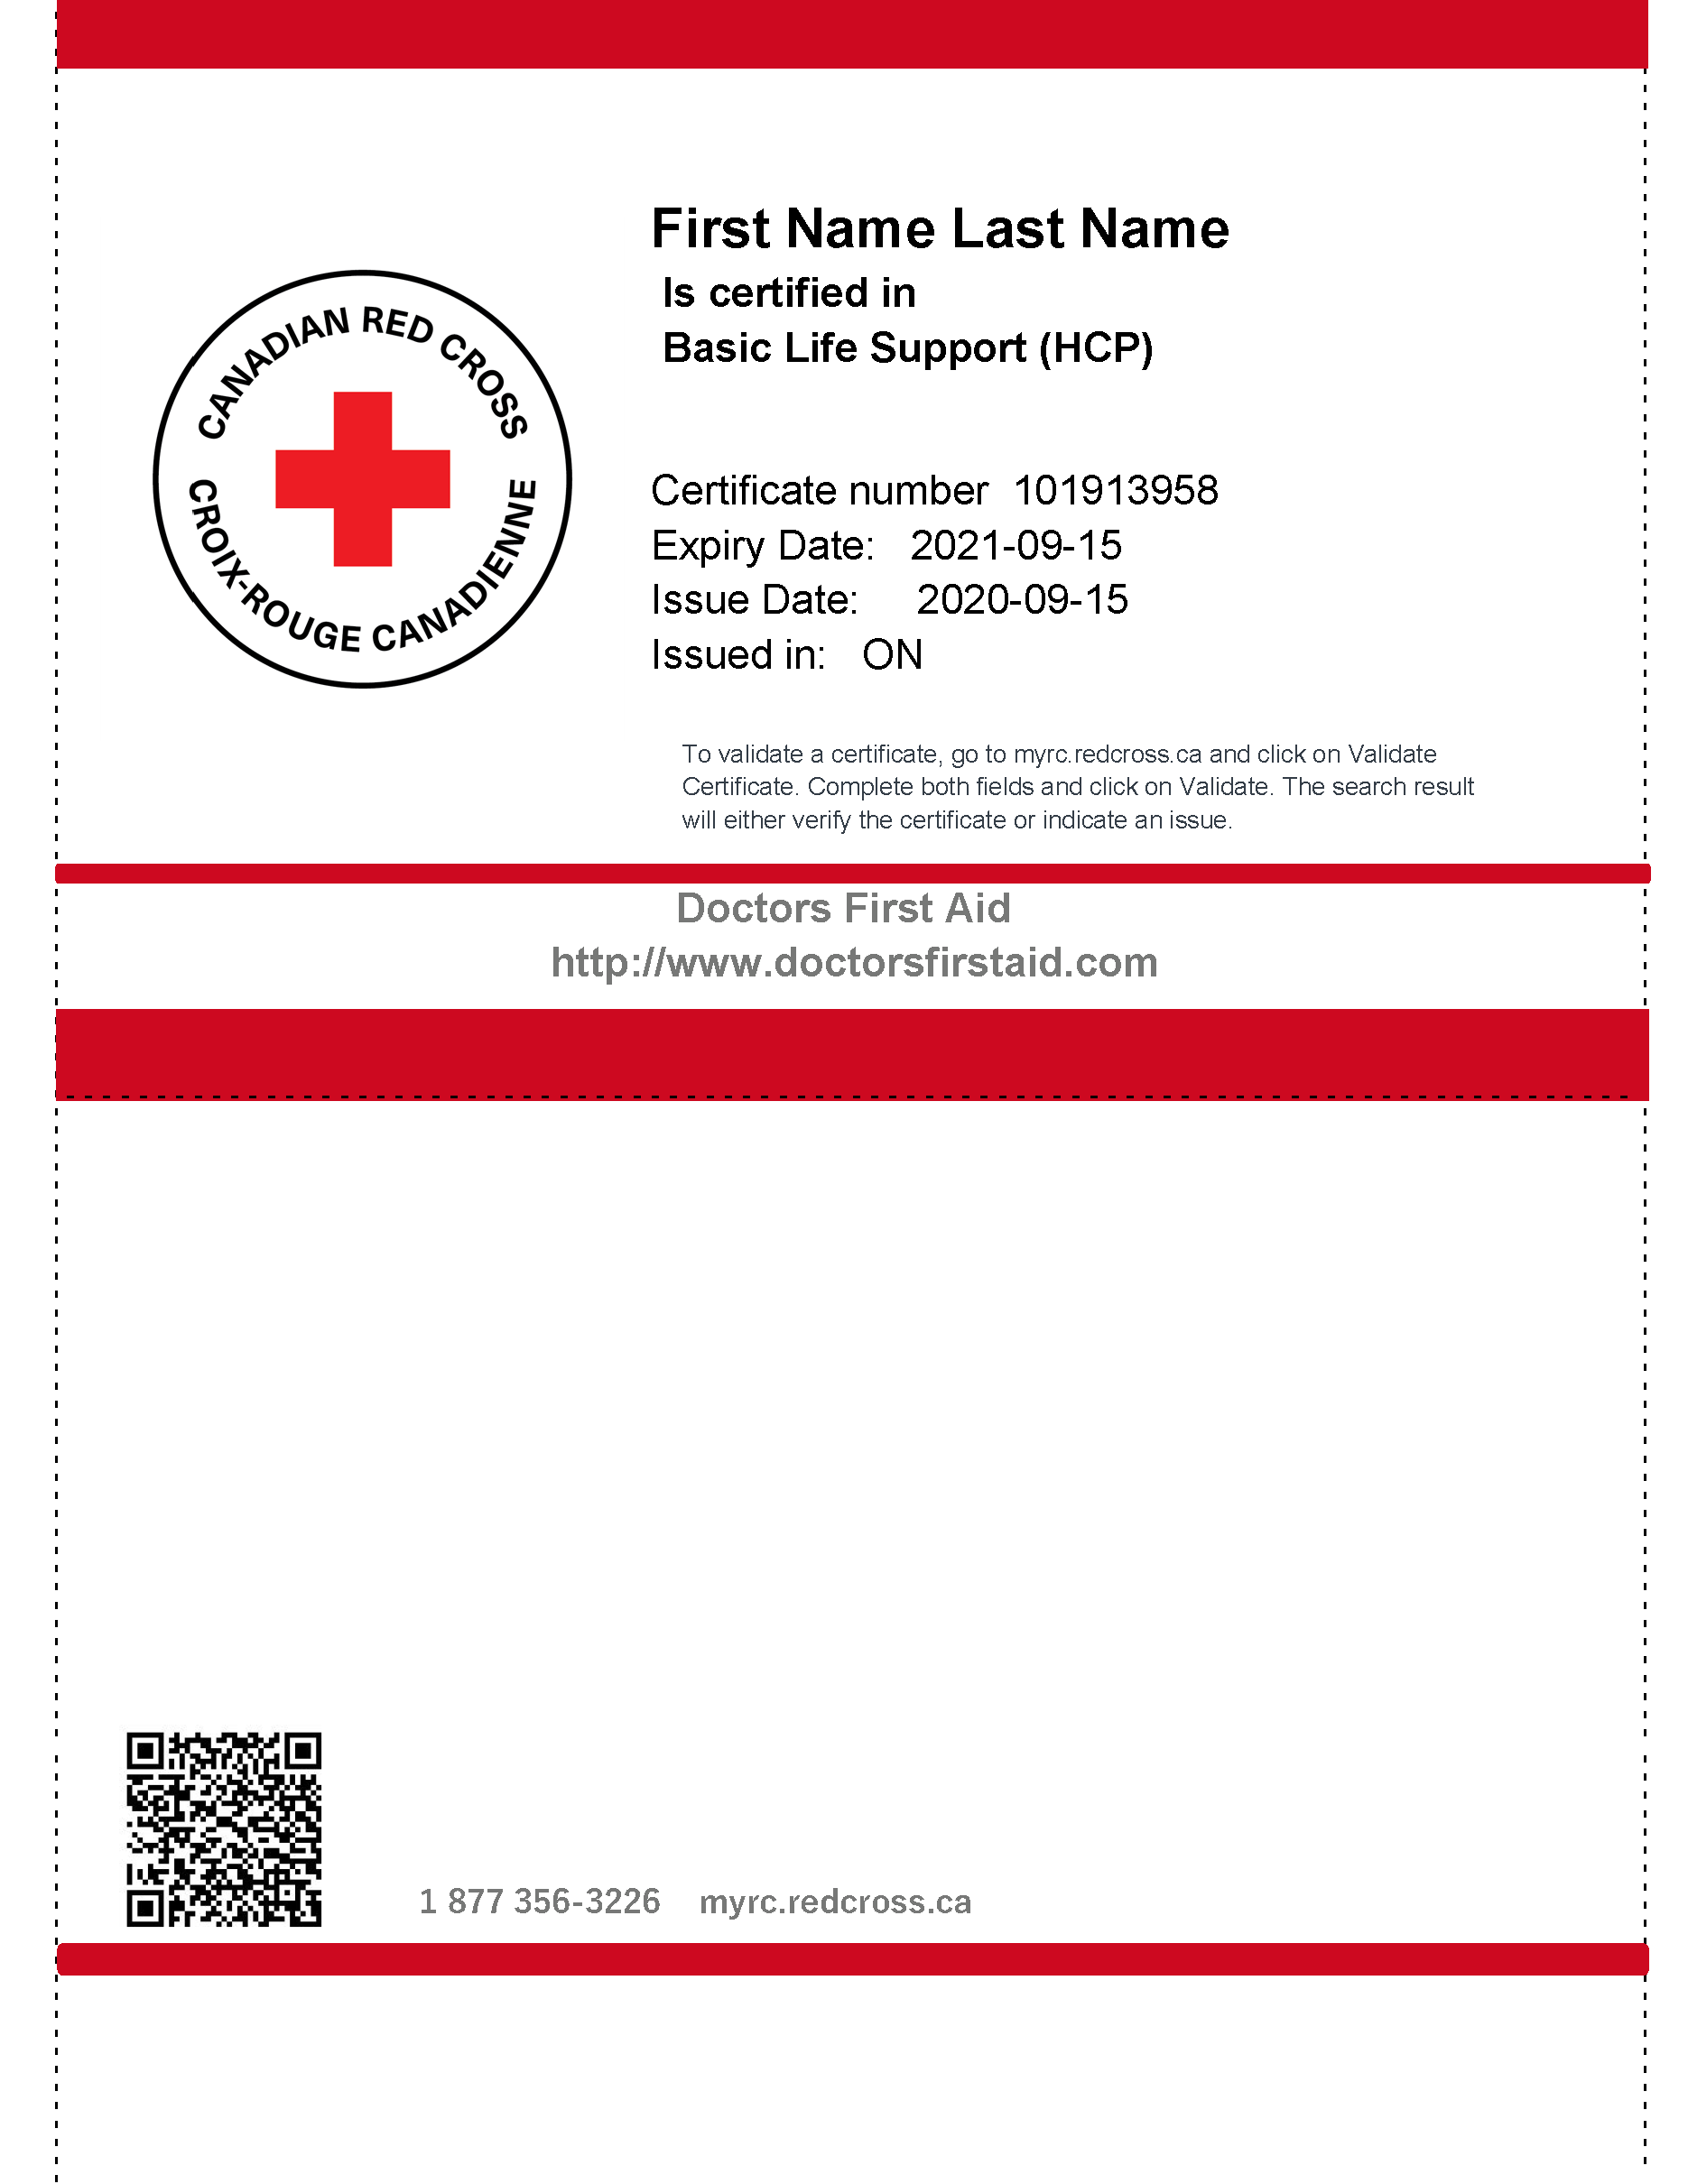 Free Online Basic Life Support (bls) Course American Red Cross Same Day